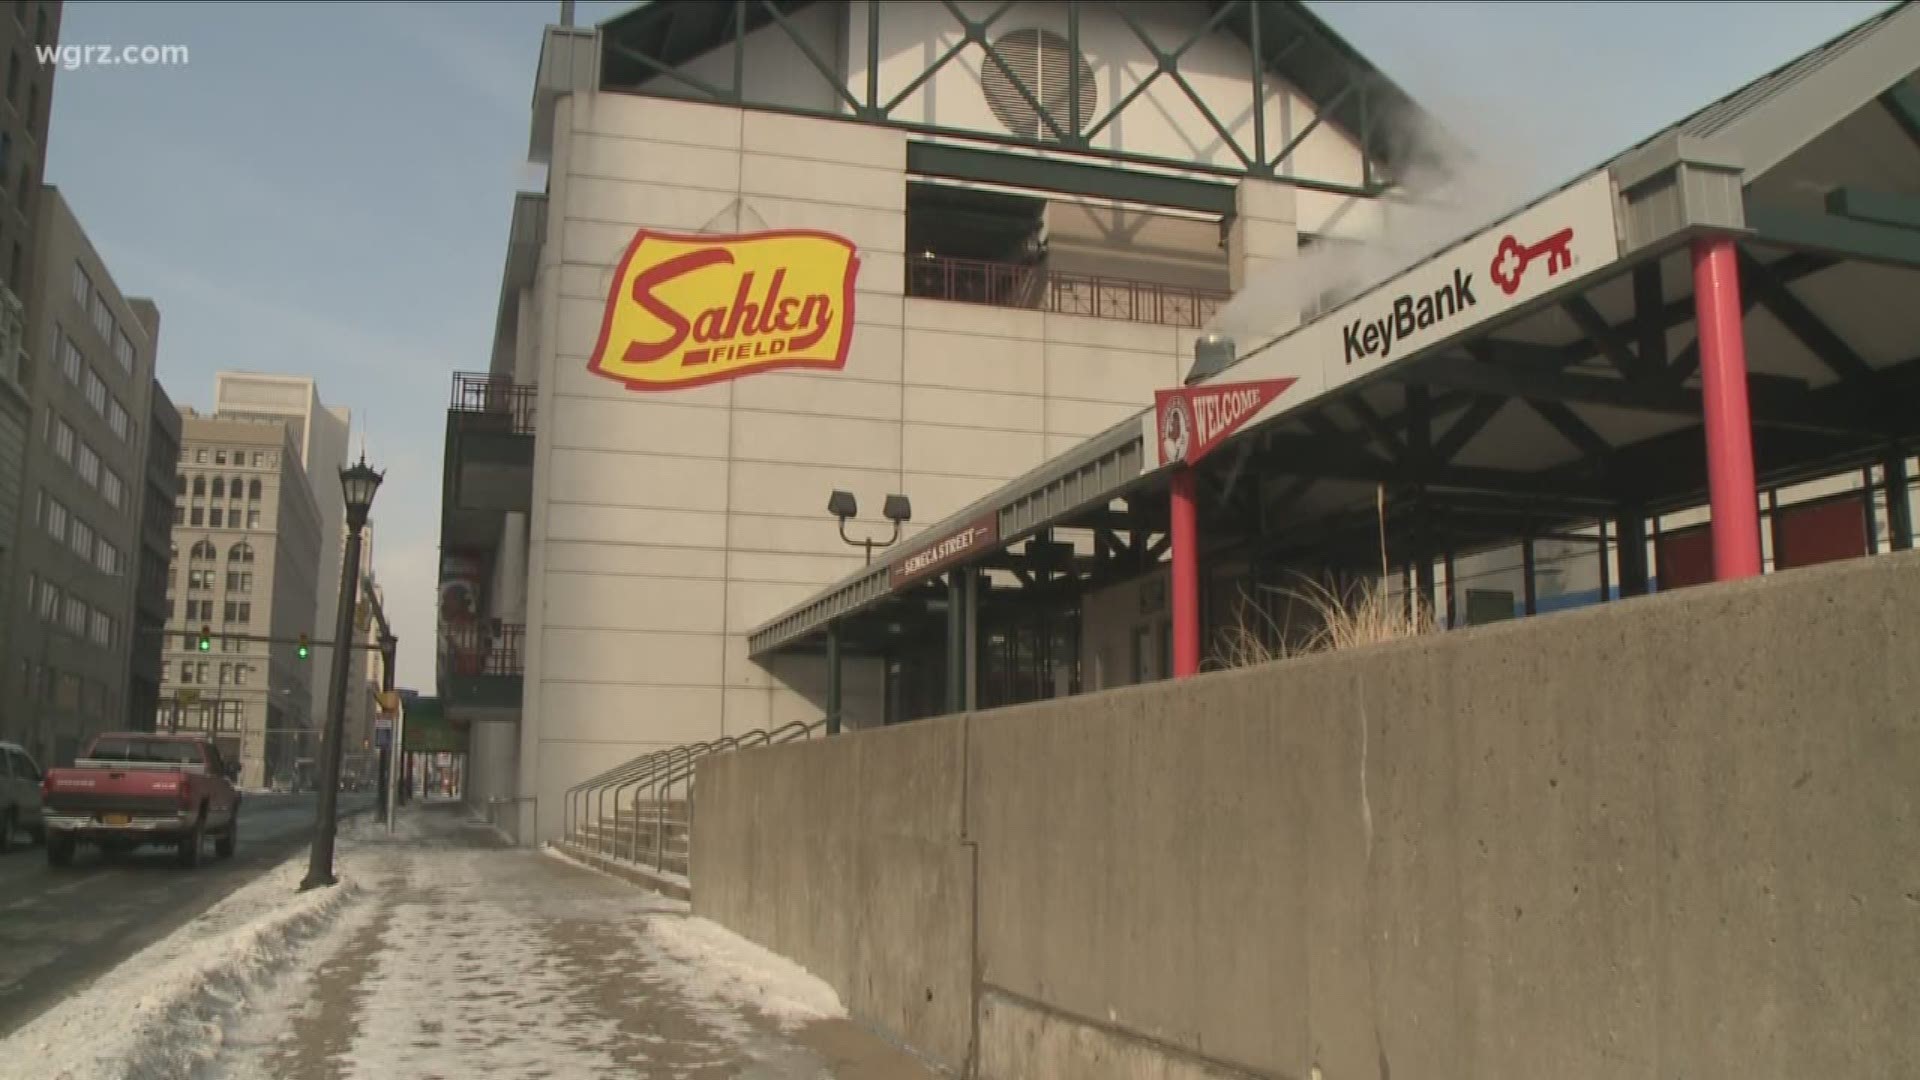 Sahlen Field Signs Go Up At The Ballpark